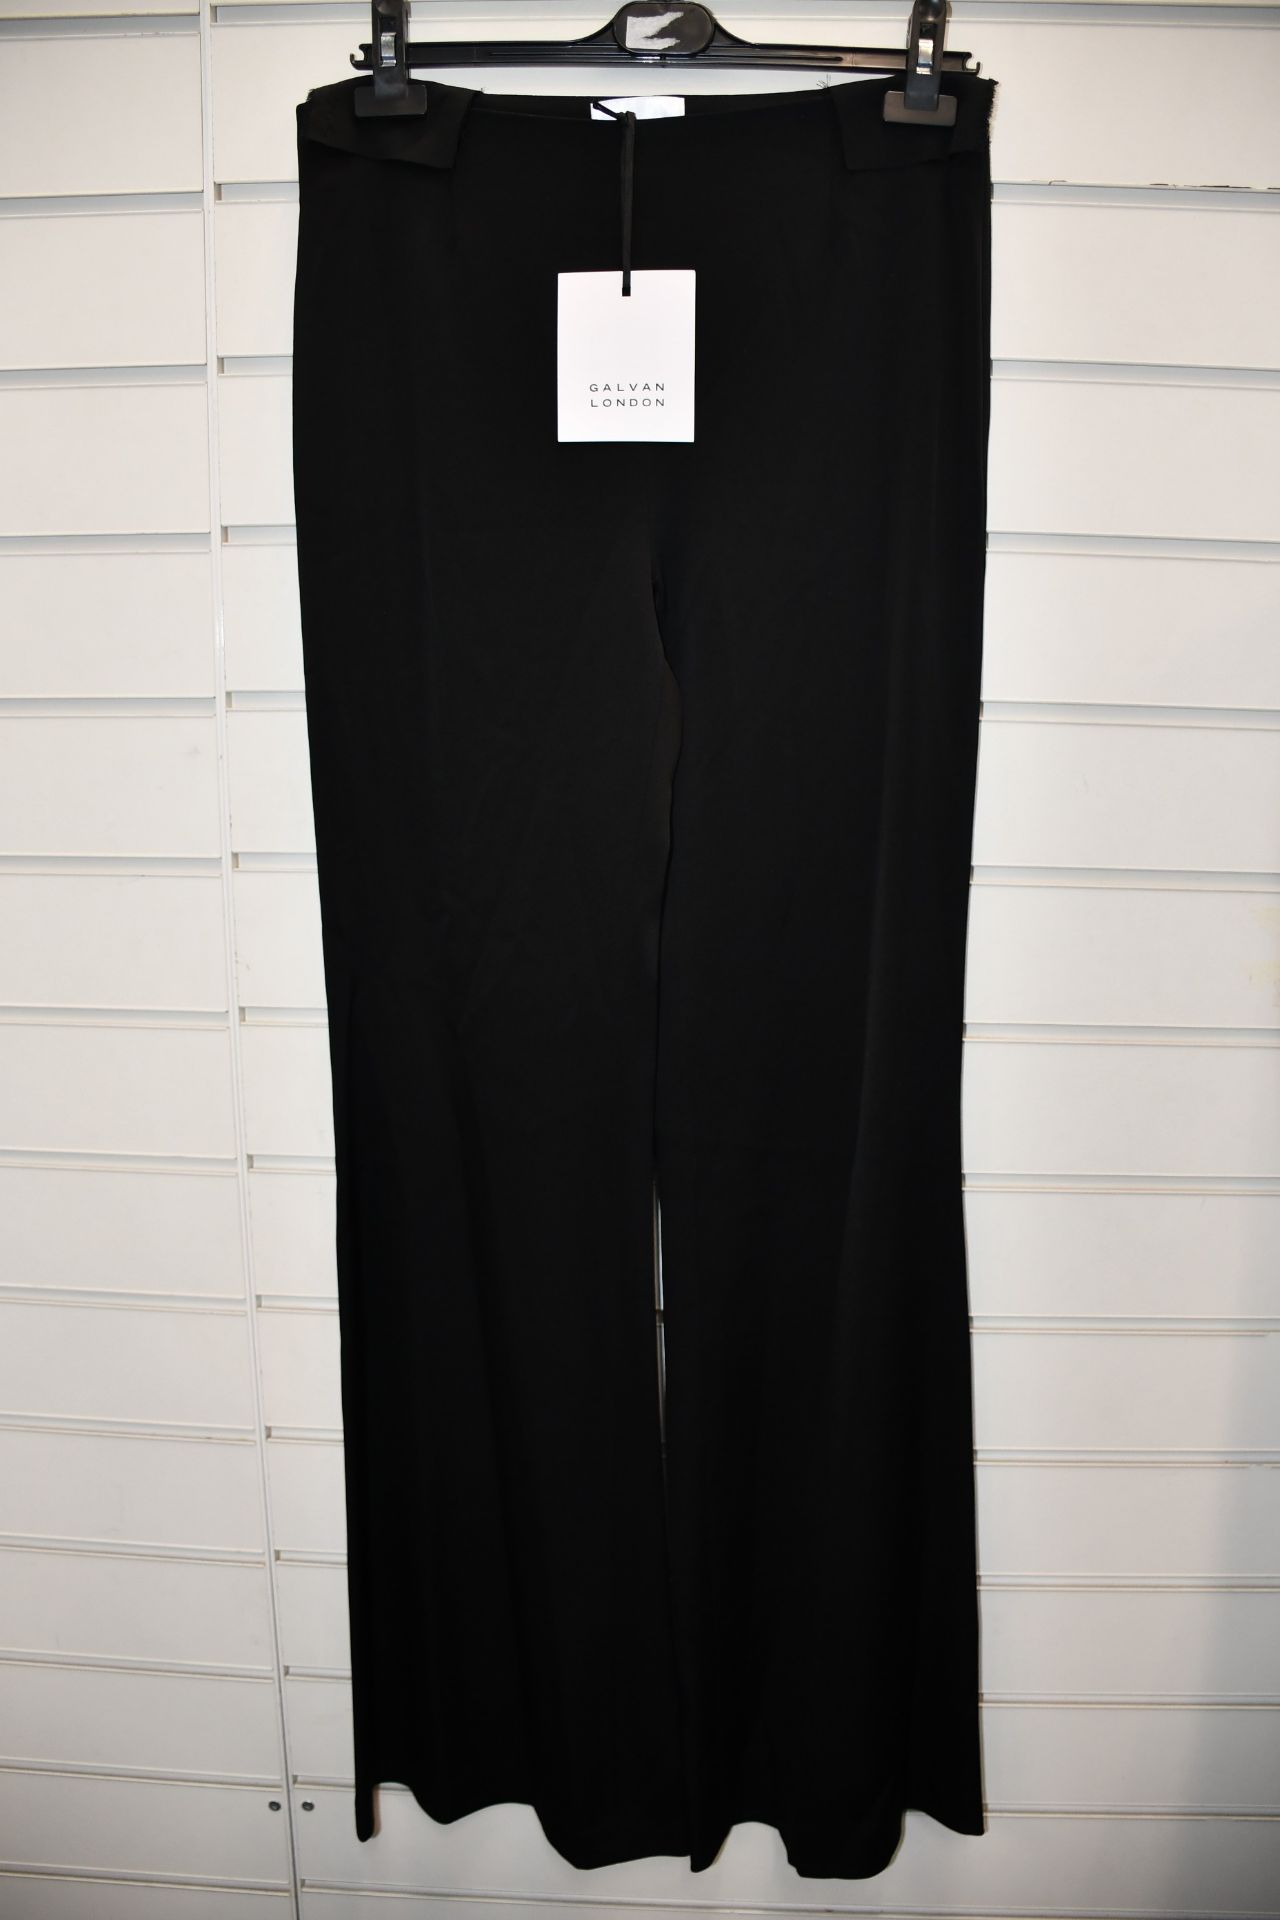 One as new Galvan London Satin Crepe high waisted satin black trousers size 42 (100COTR300201BK).